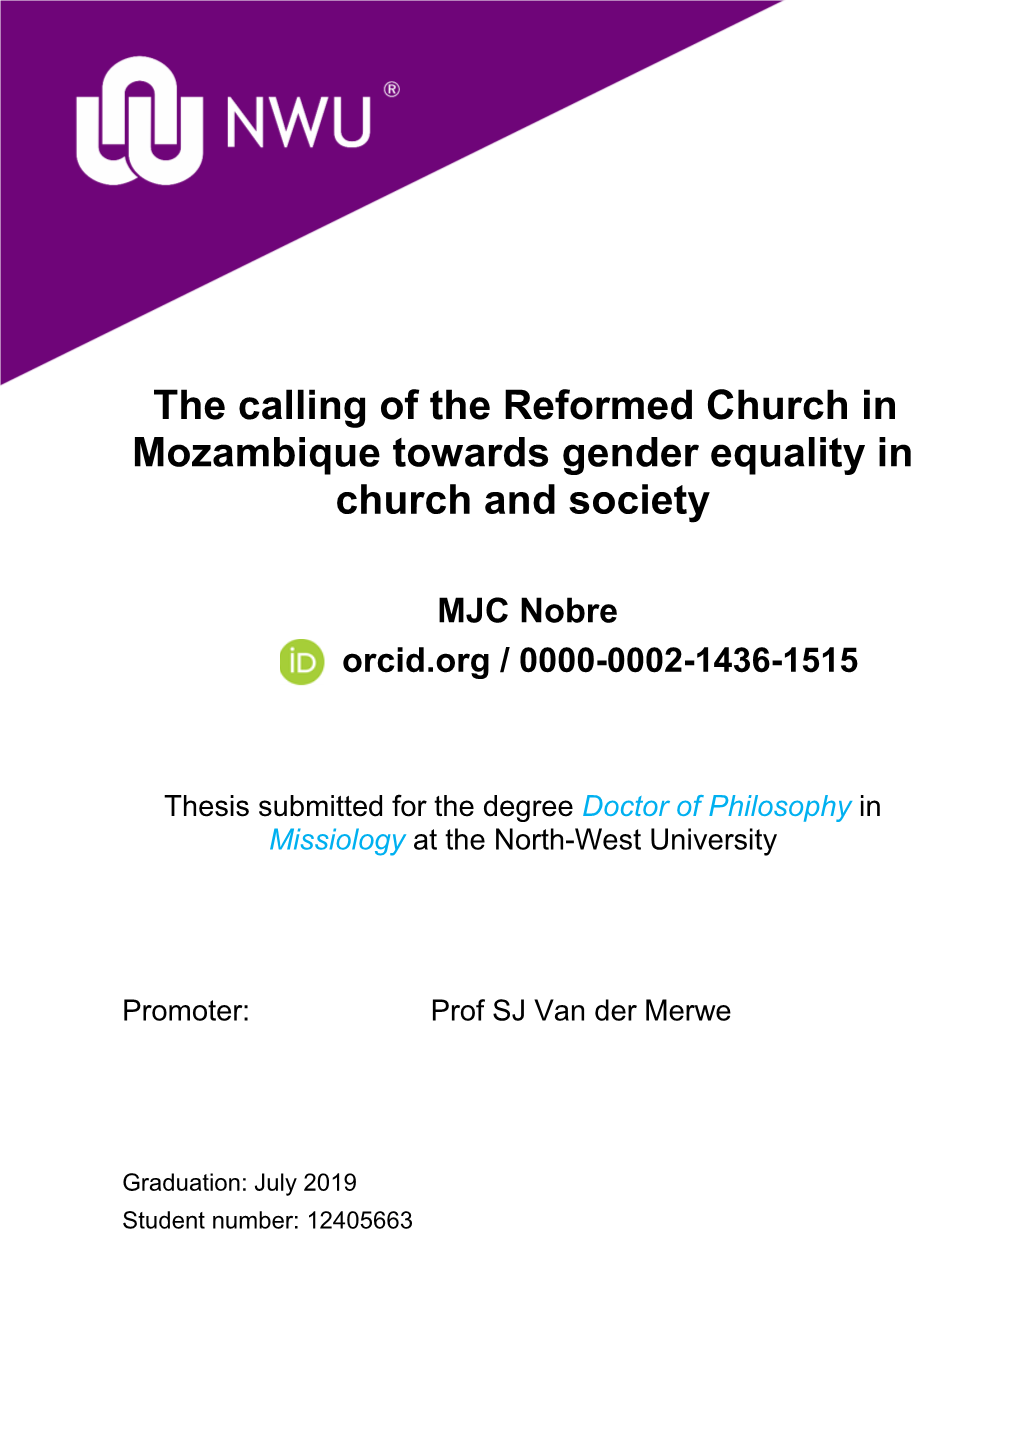 The Calling of the Reformed Church in Mozambique Towards Gender Equality in Church and Society